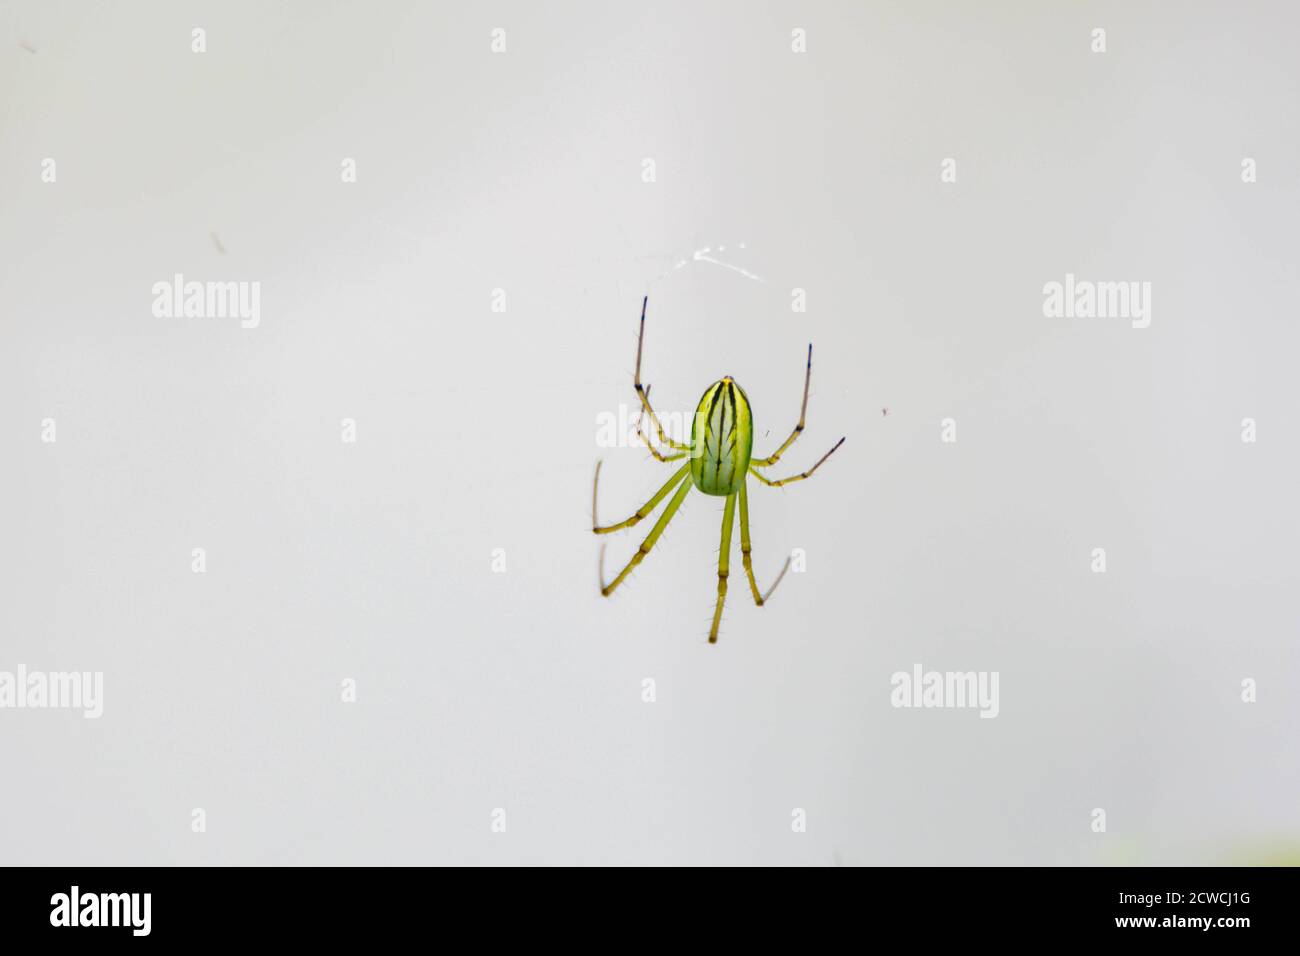 Insect - Green spider on web Stock Photo